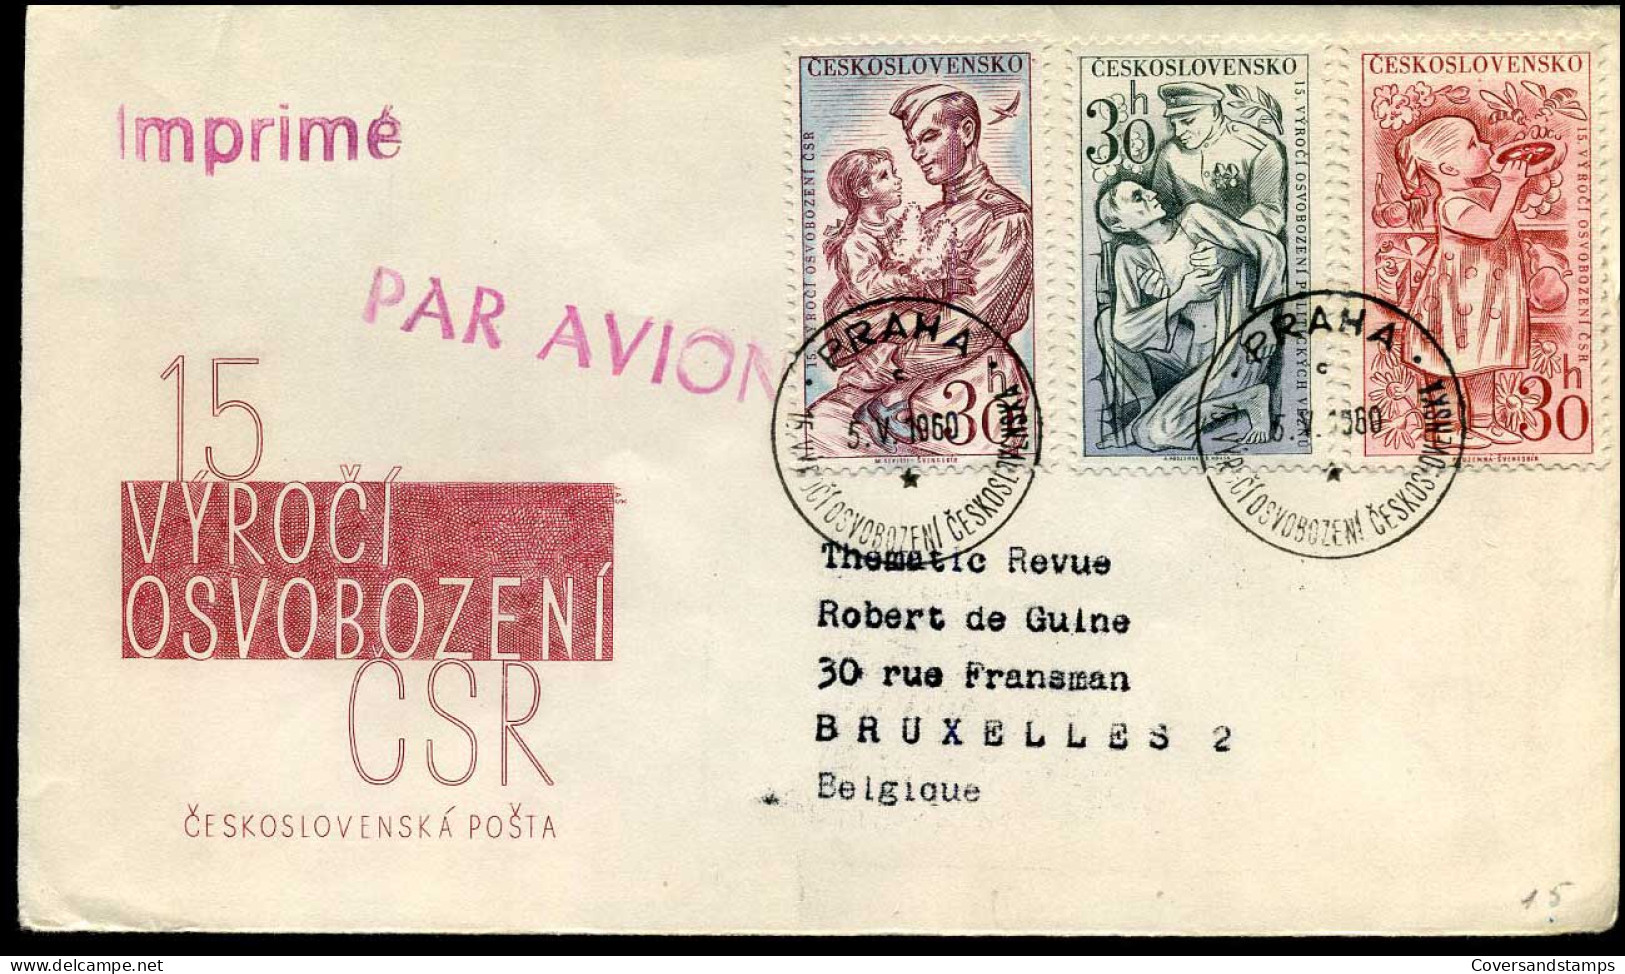 Cover From Prague To Brussels, Belgium - Storia Postale